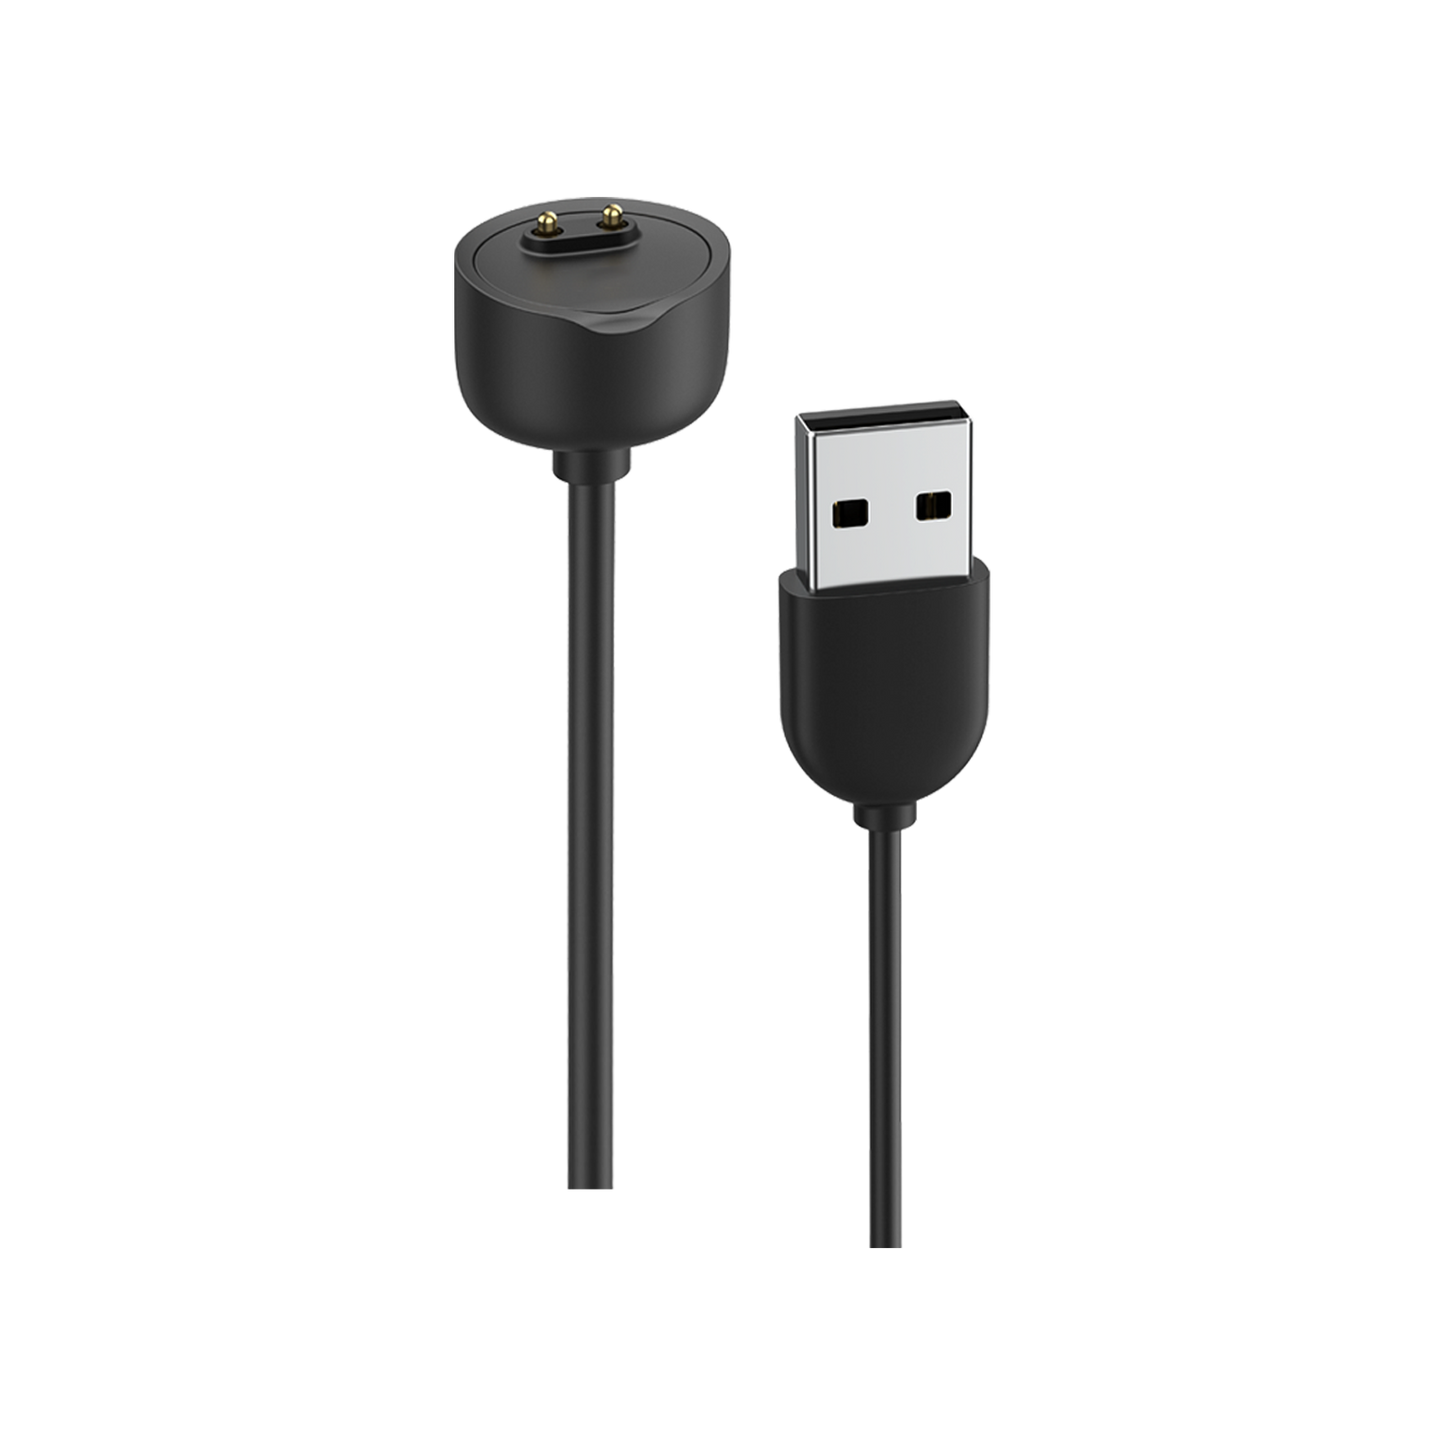 Xiaomi Smart Band 7 Charging Cable od Xiaomi w SimplyBuy.pl